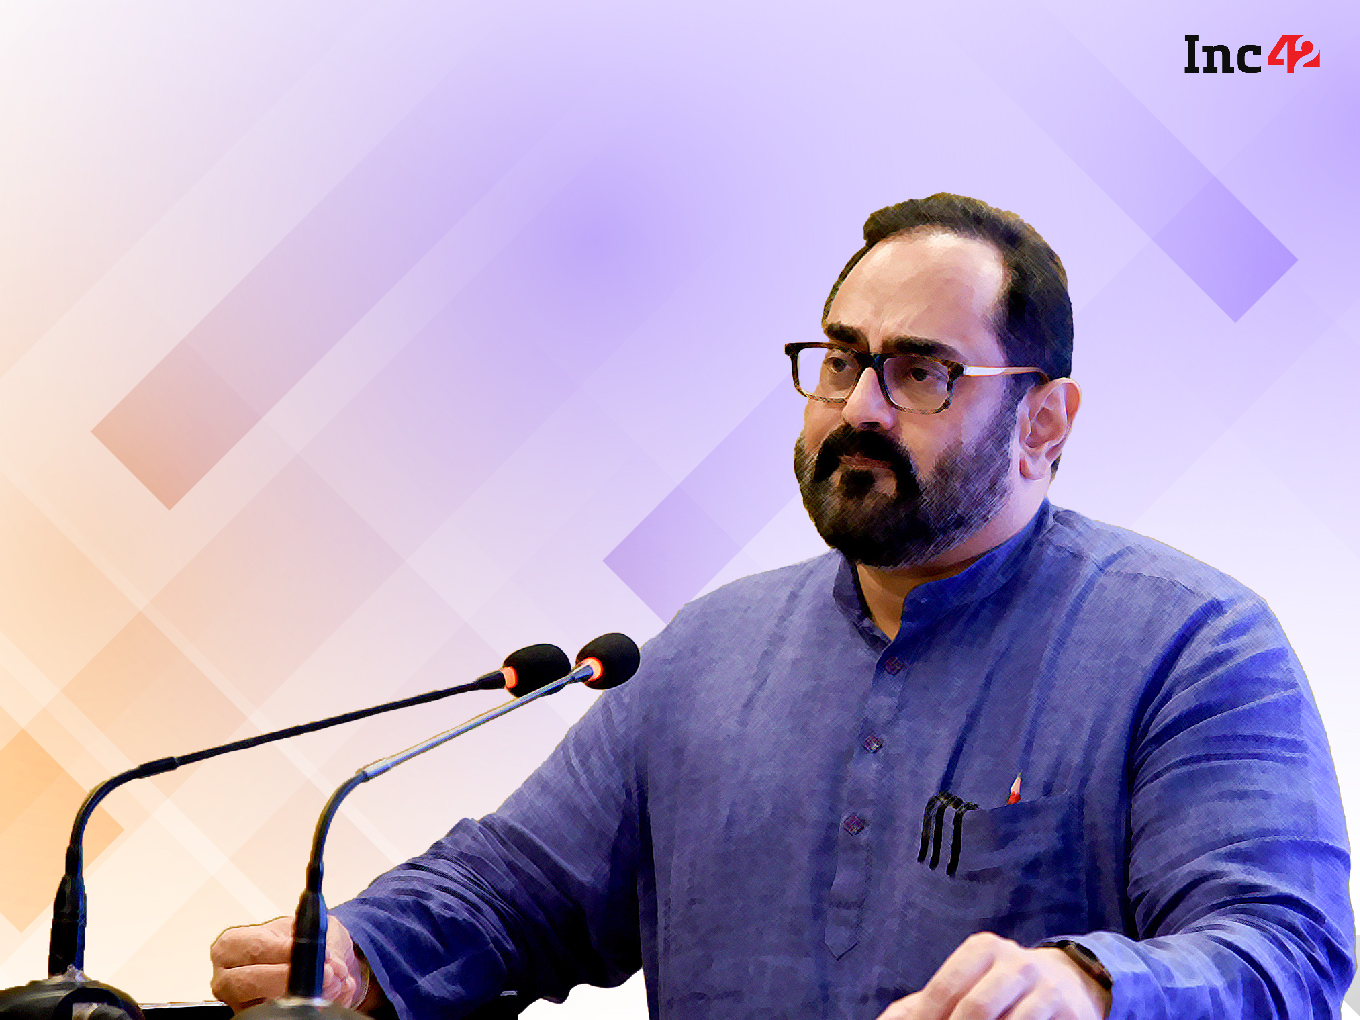 No Law Prevents Startups From Crypto Or Web3 Innovation: Rajeev Chandrasekhar